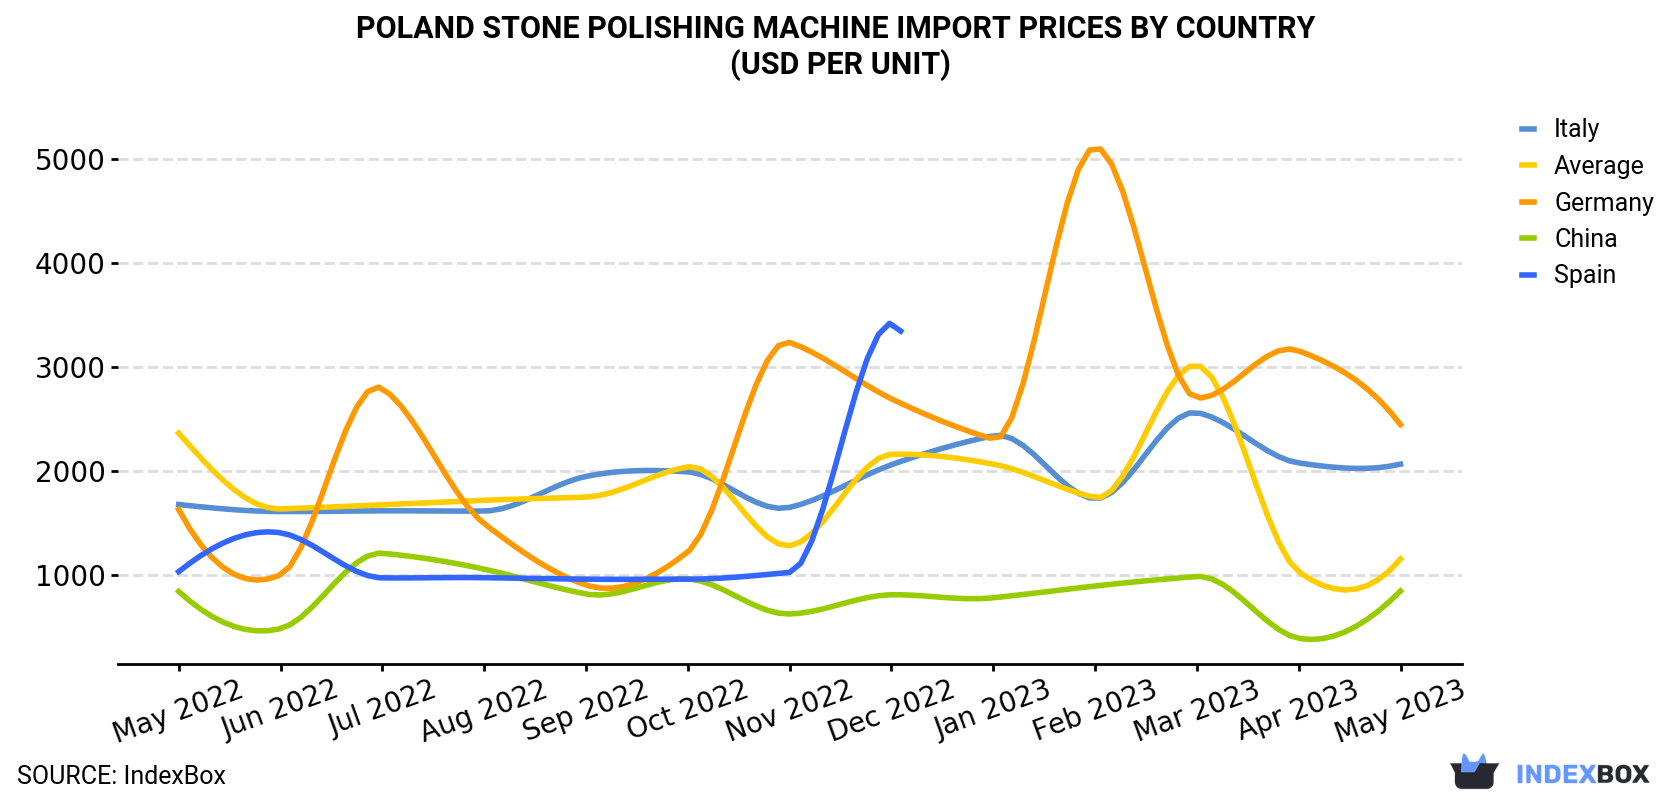 Poland Stone Polishing Machine Import Prices By Country (USD Per Unit)